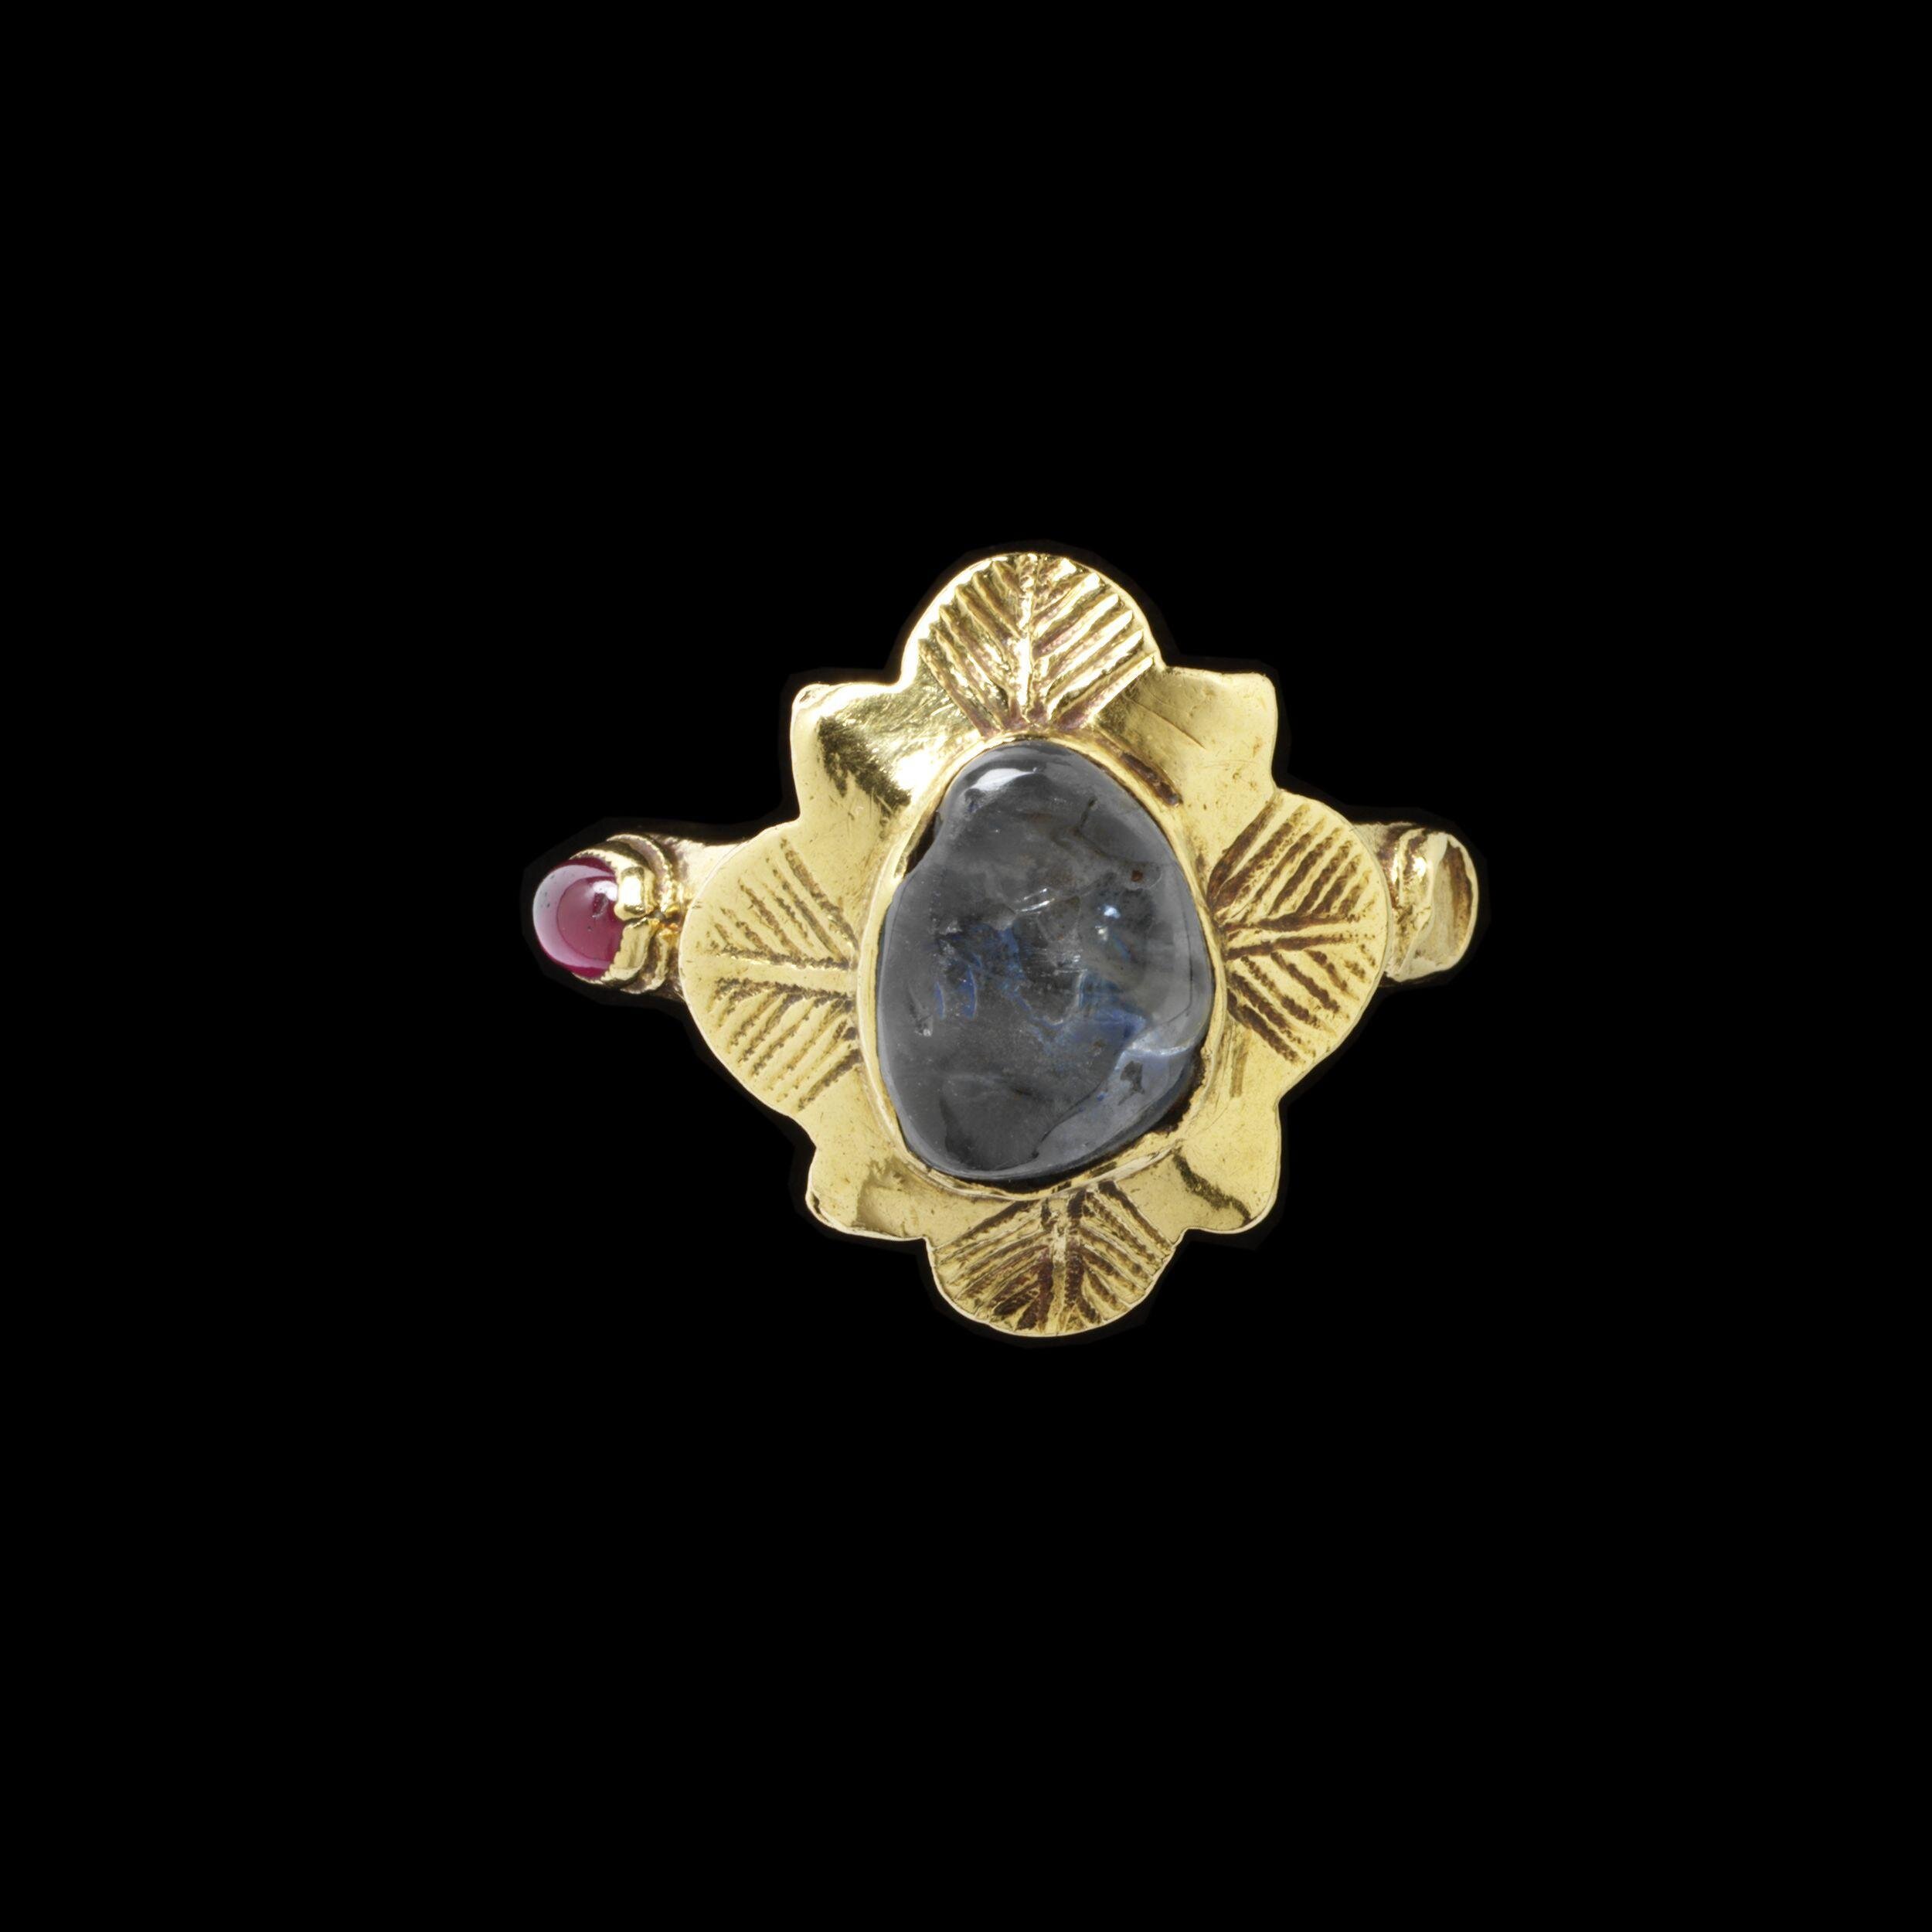 Gold and sapphire ring from Edmund Waterton's ring collection